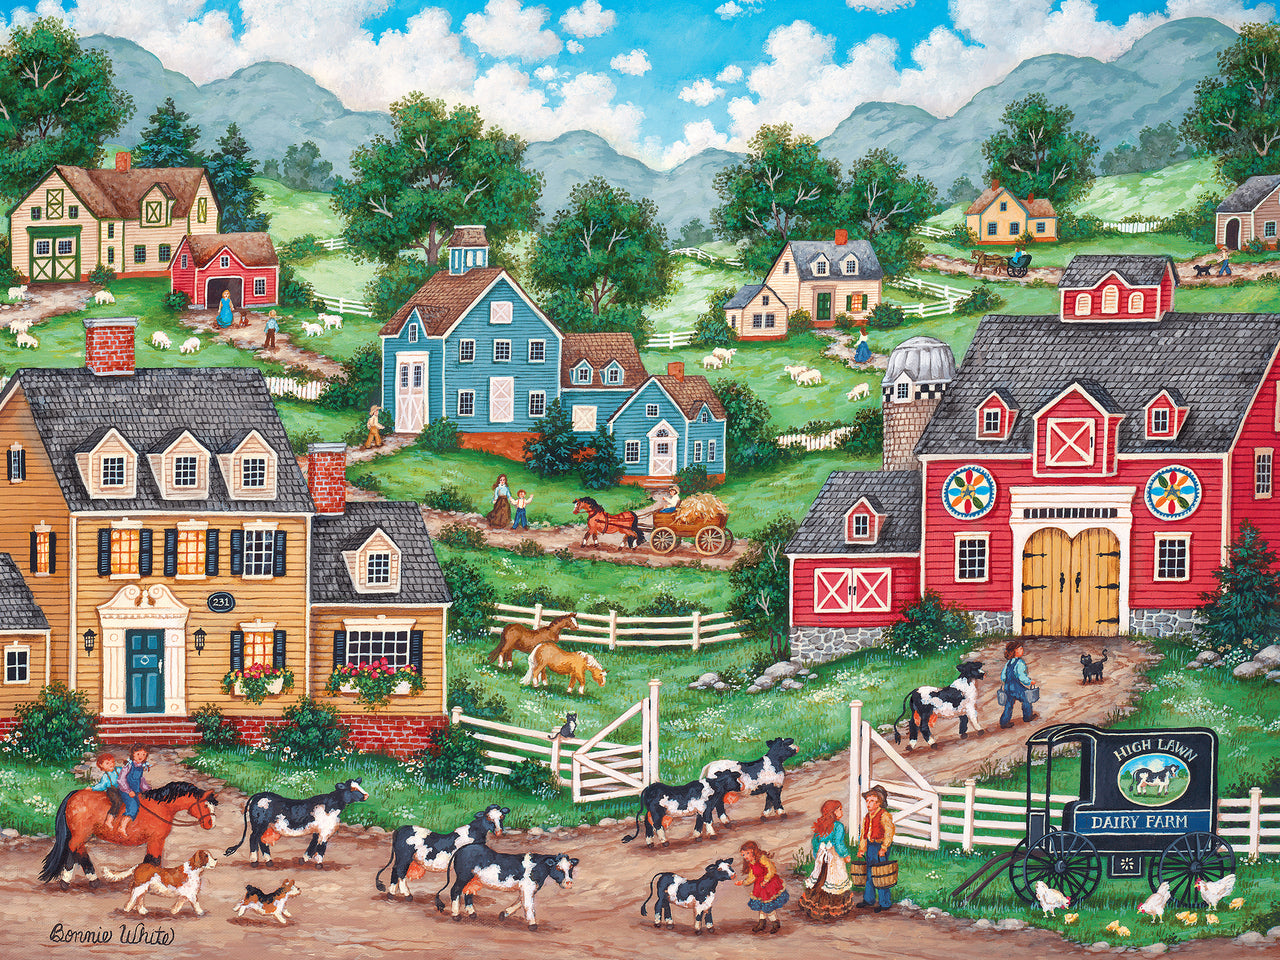 Heartland Collection The Curious Calf - 550 Piece Jigsaw Puzzle by Masterpieces